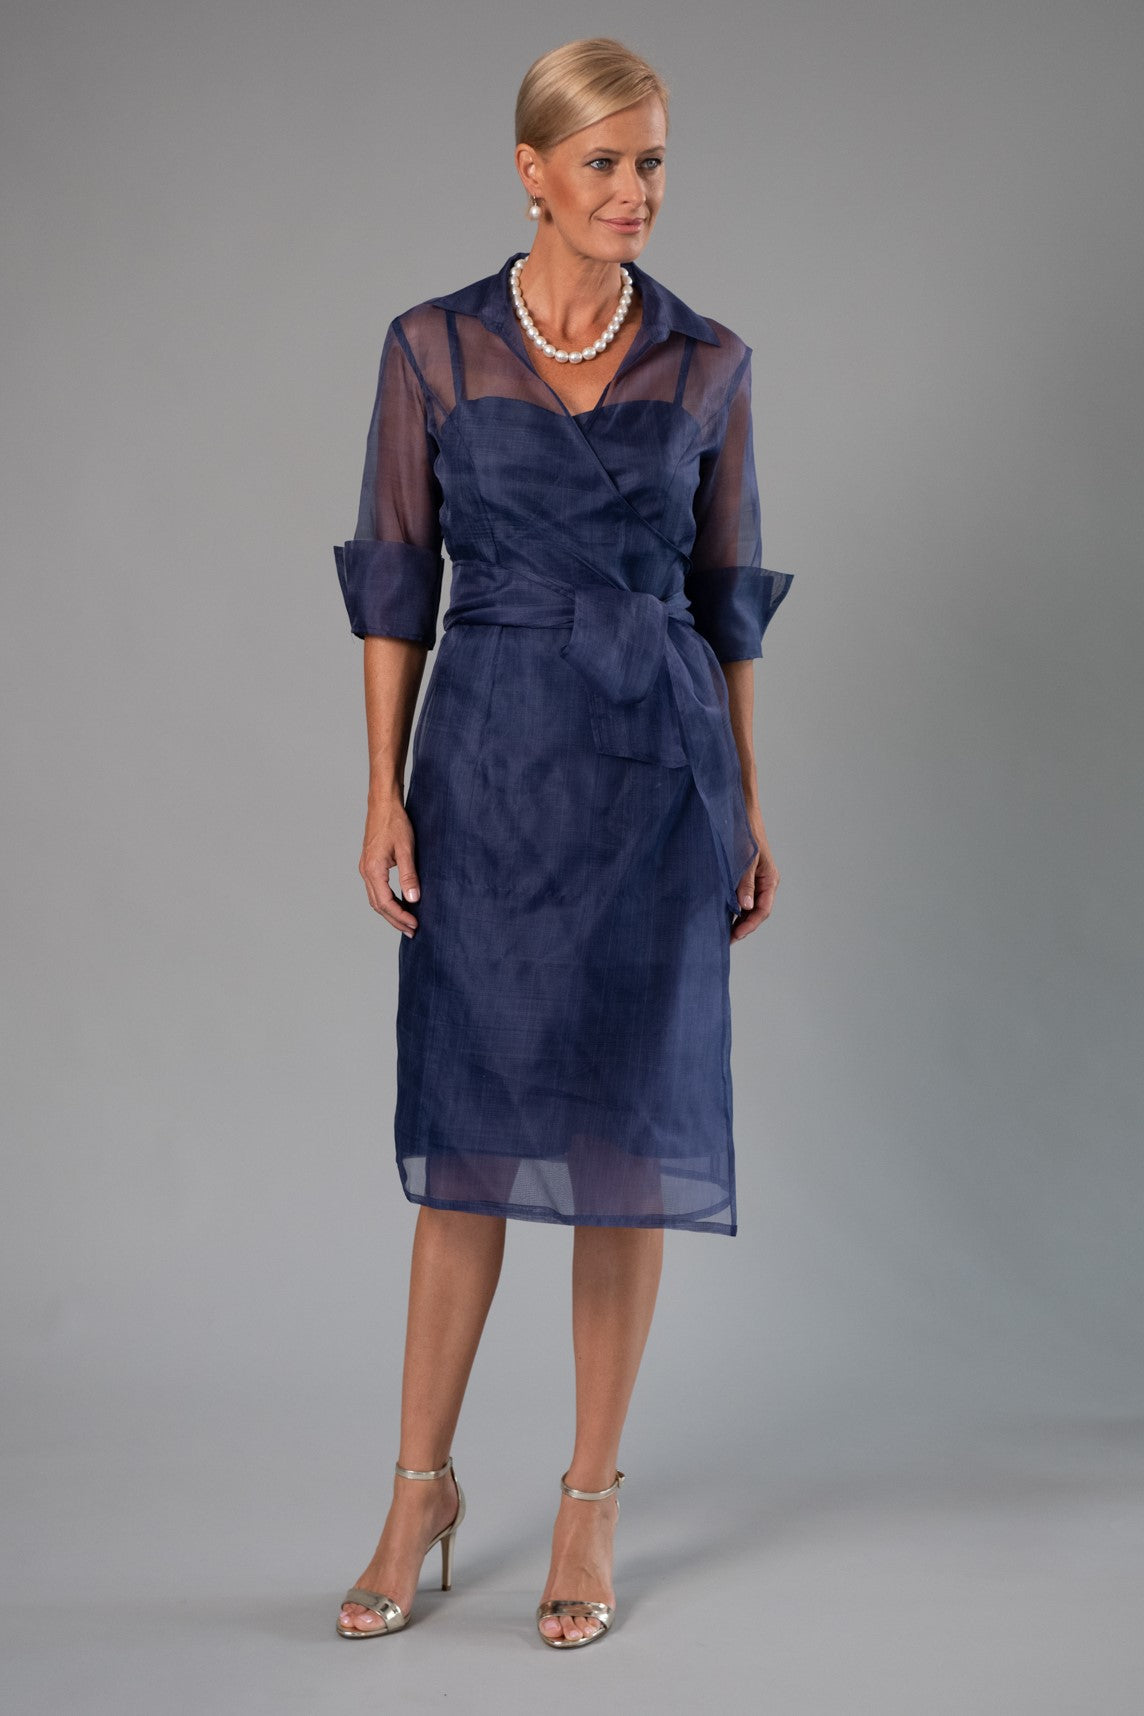 Cocktail Organza Wrap Dress - Navy for the Mother of the Bride / Groom